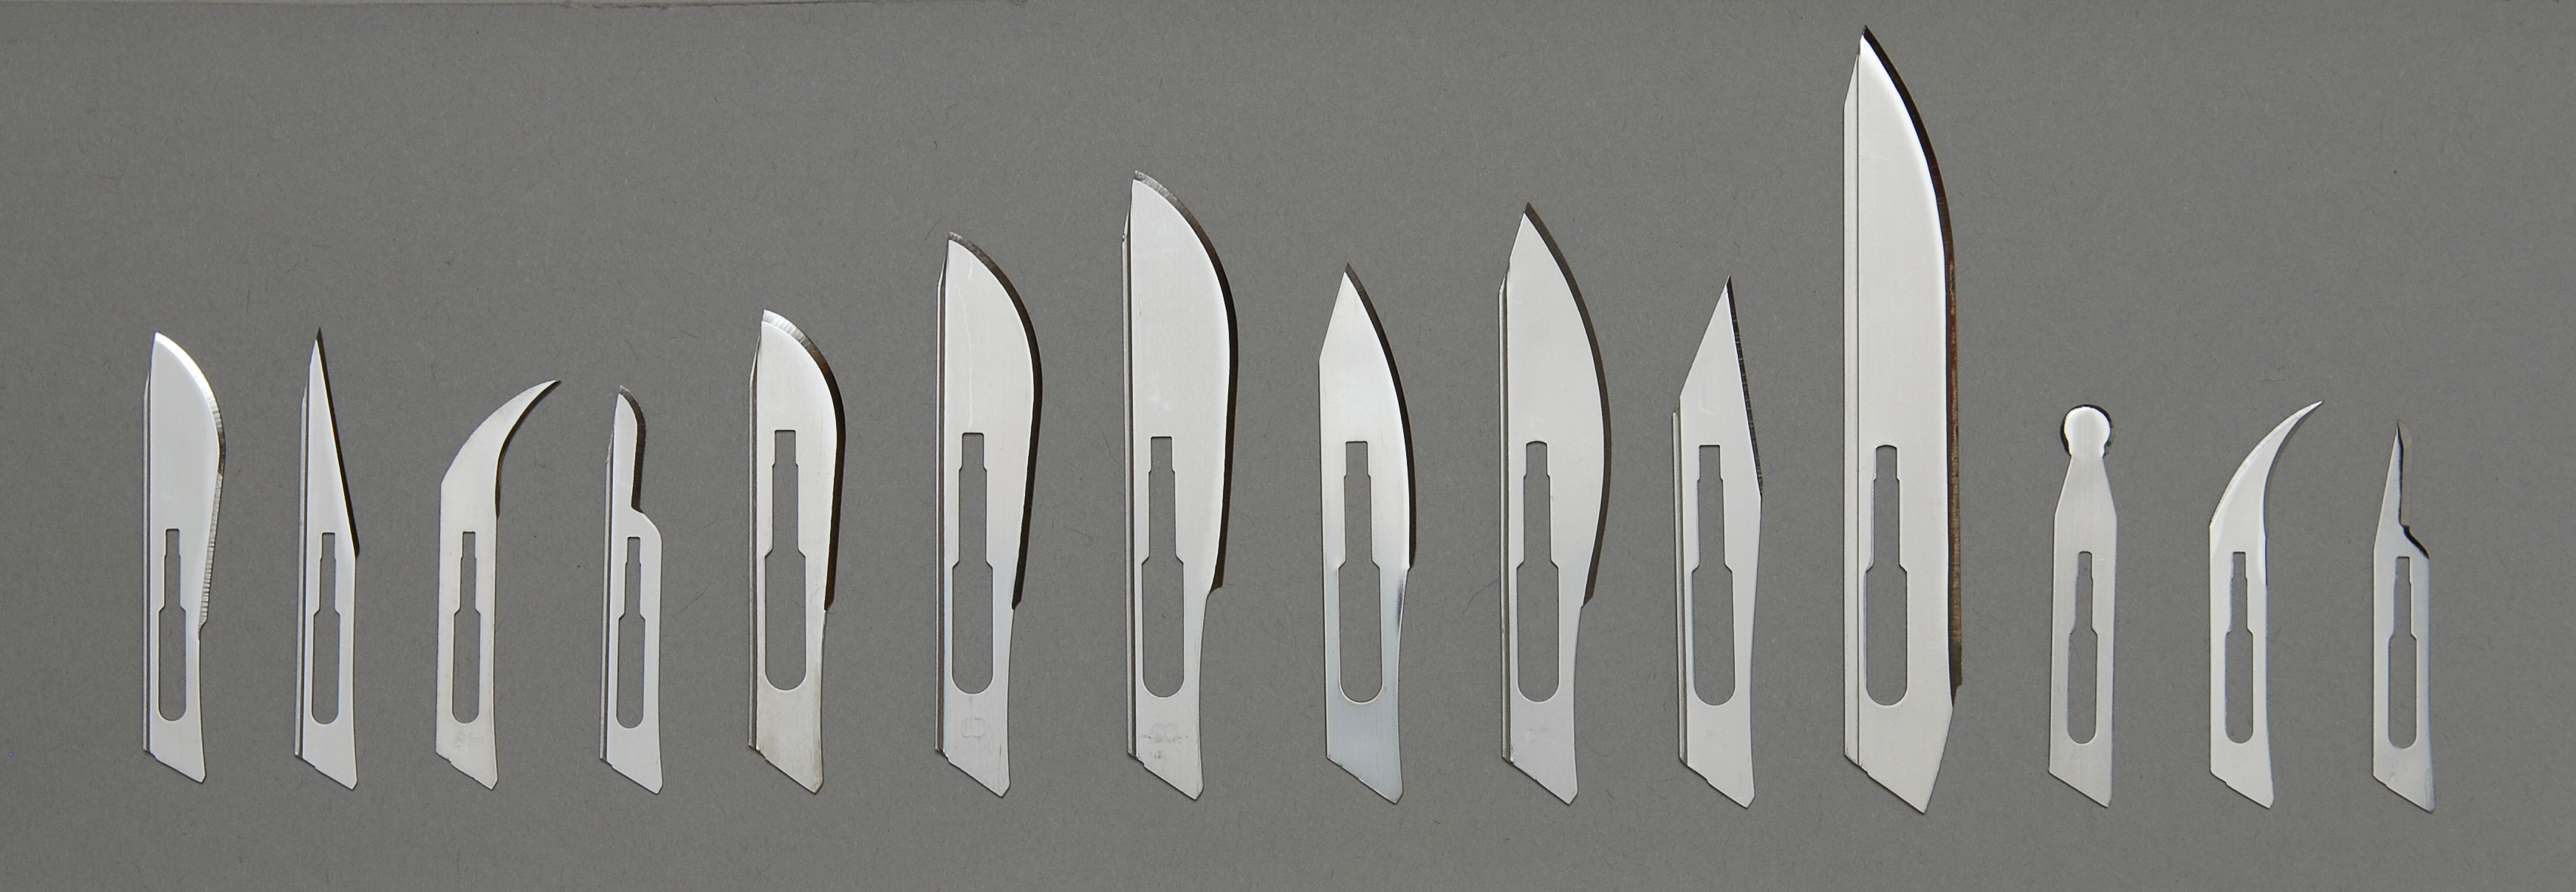 scalpel blade sizes and uses